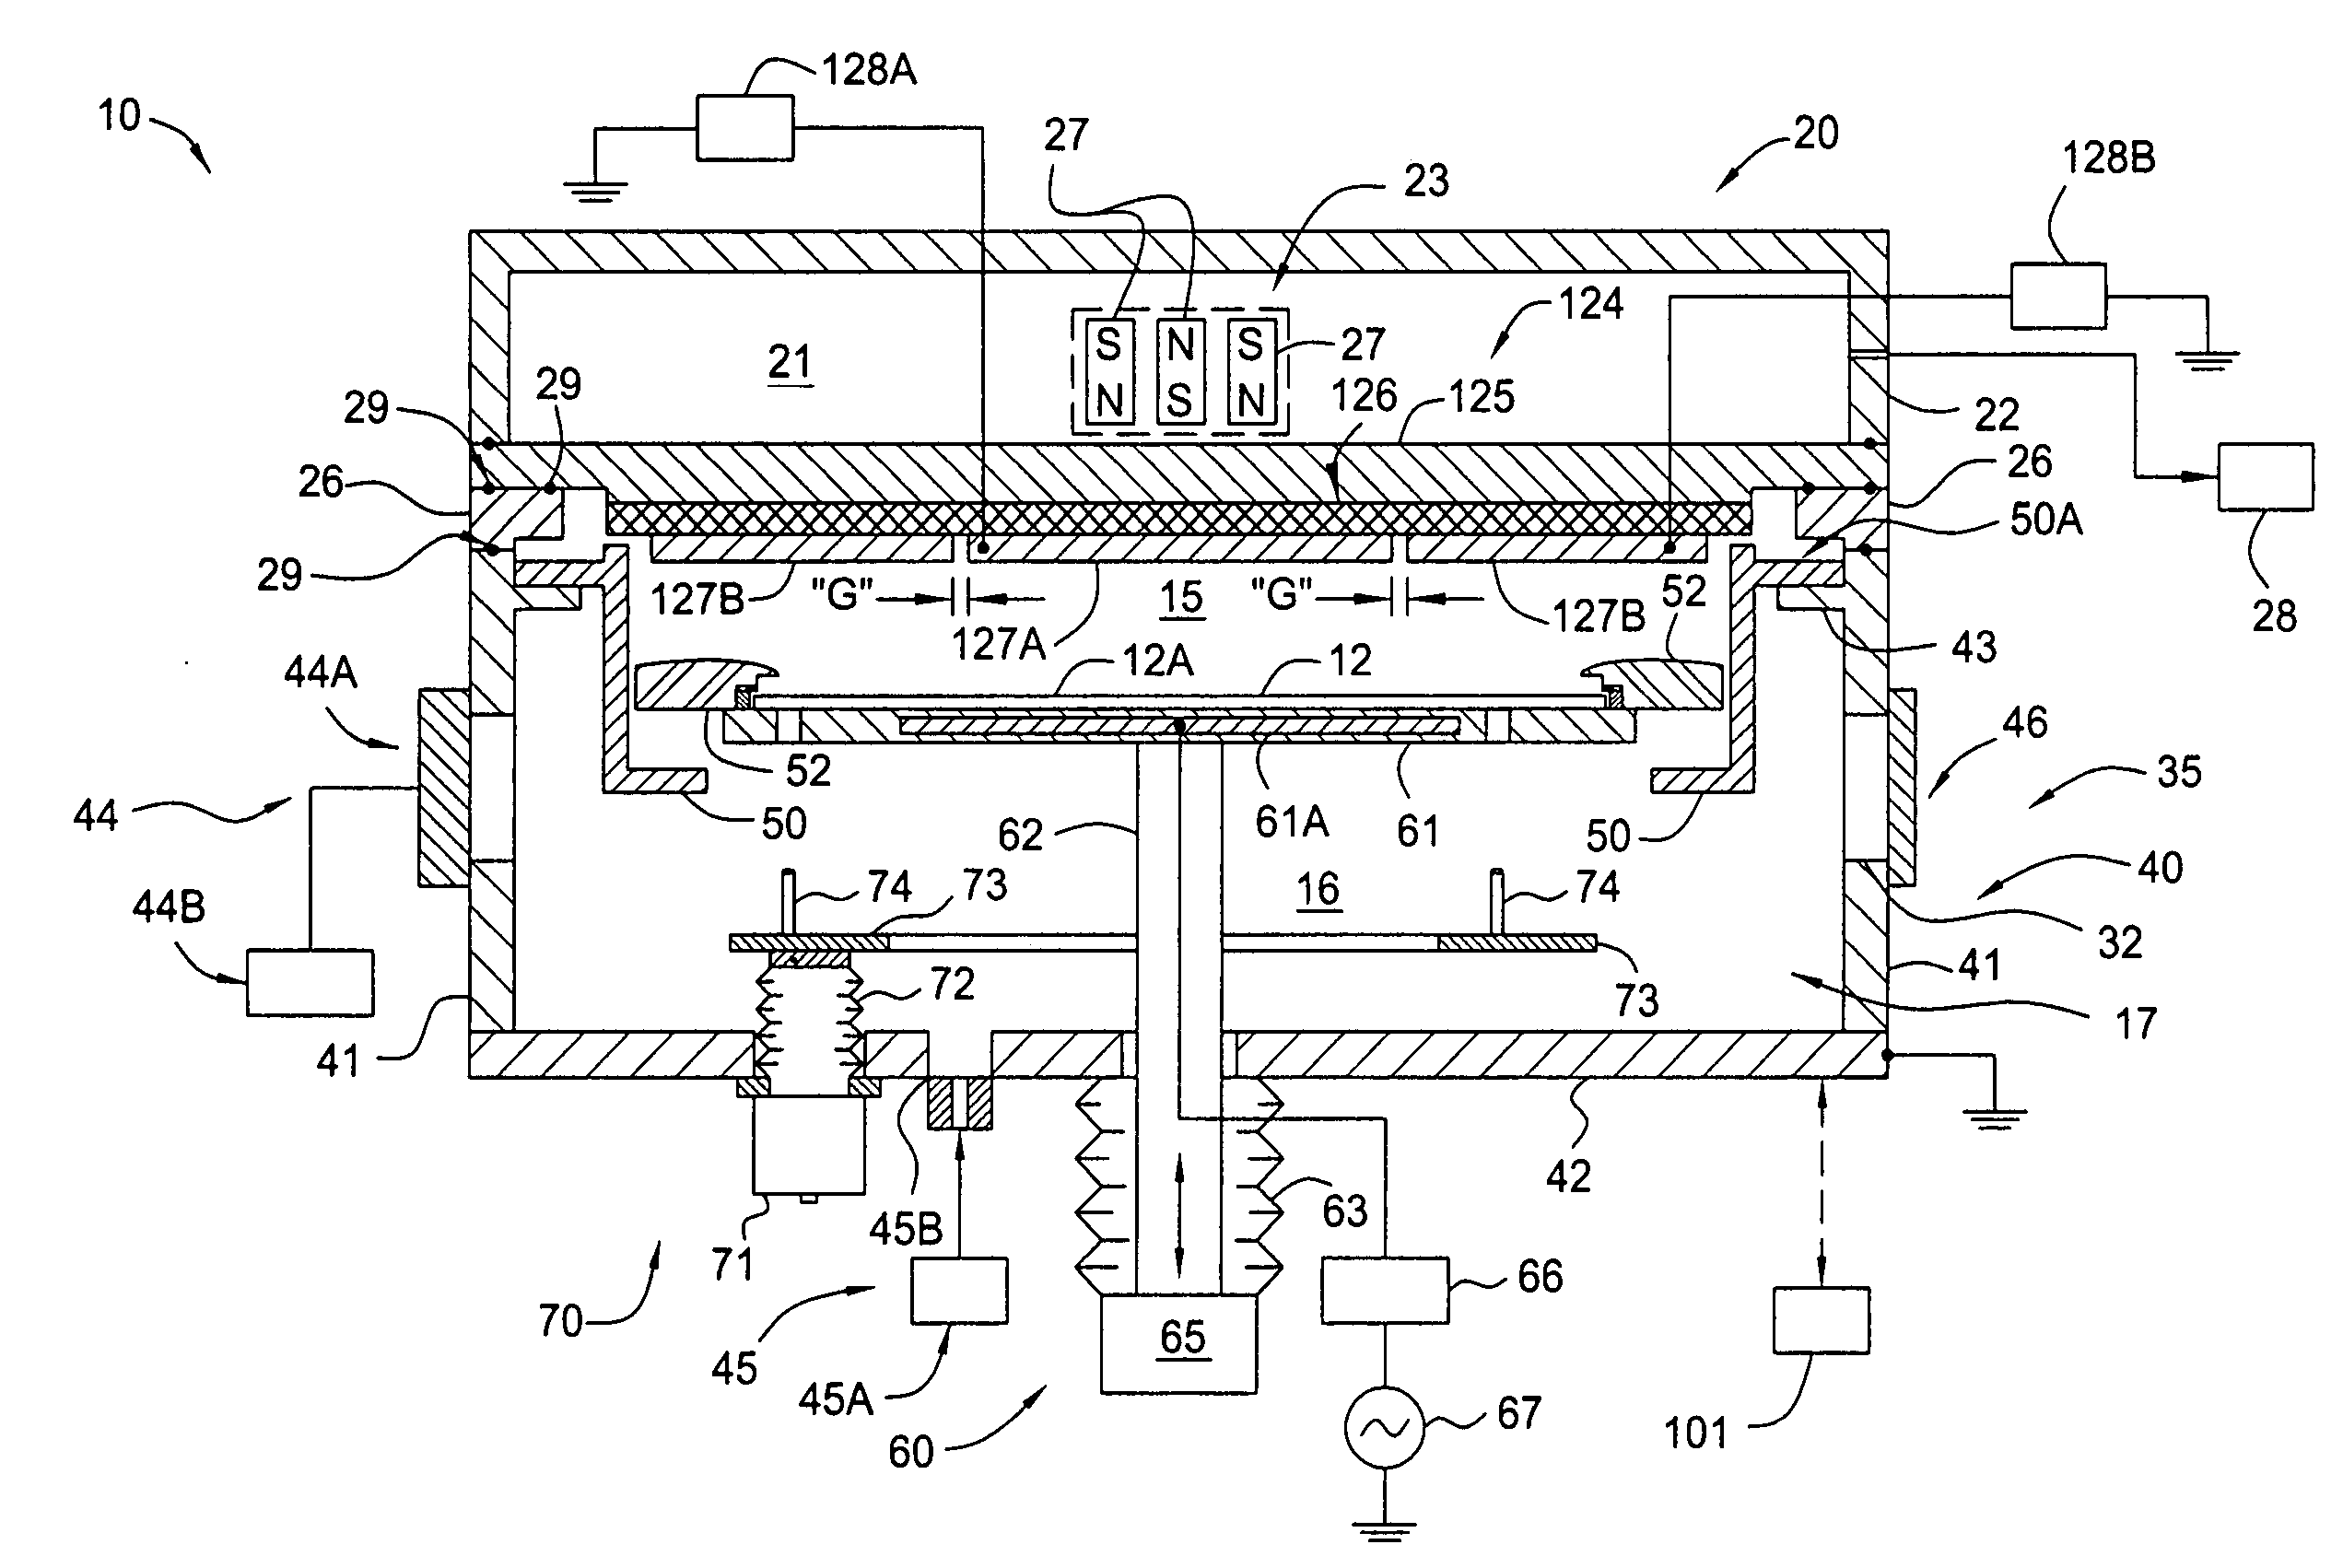 Method of processing a substrate using a large-area magnetron sputtering chamber with individually controlled sputtering zones